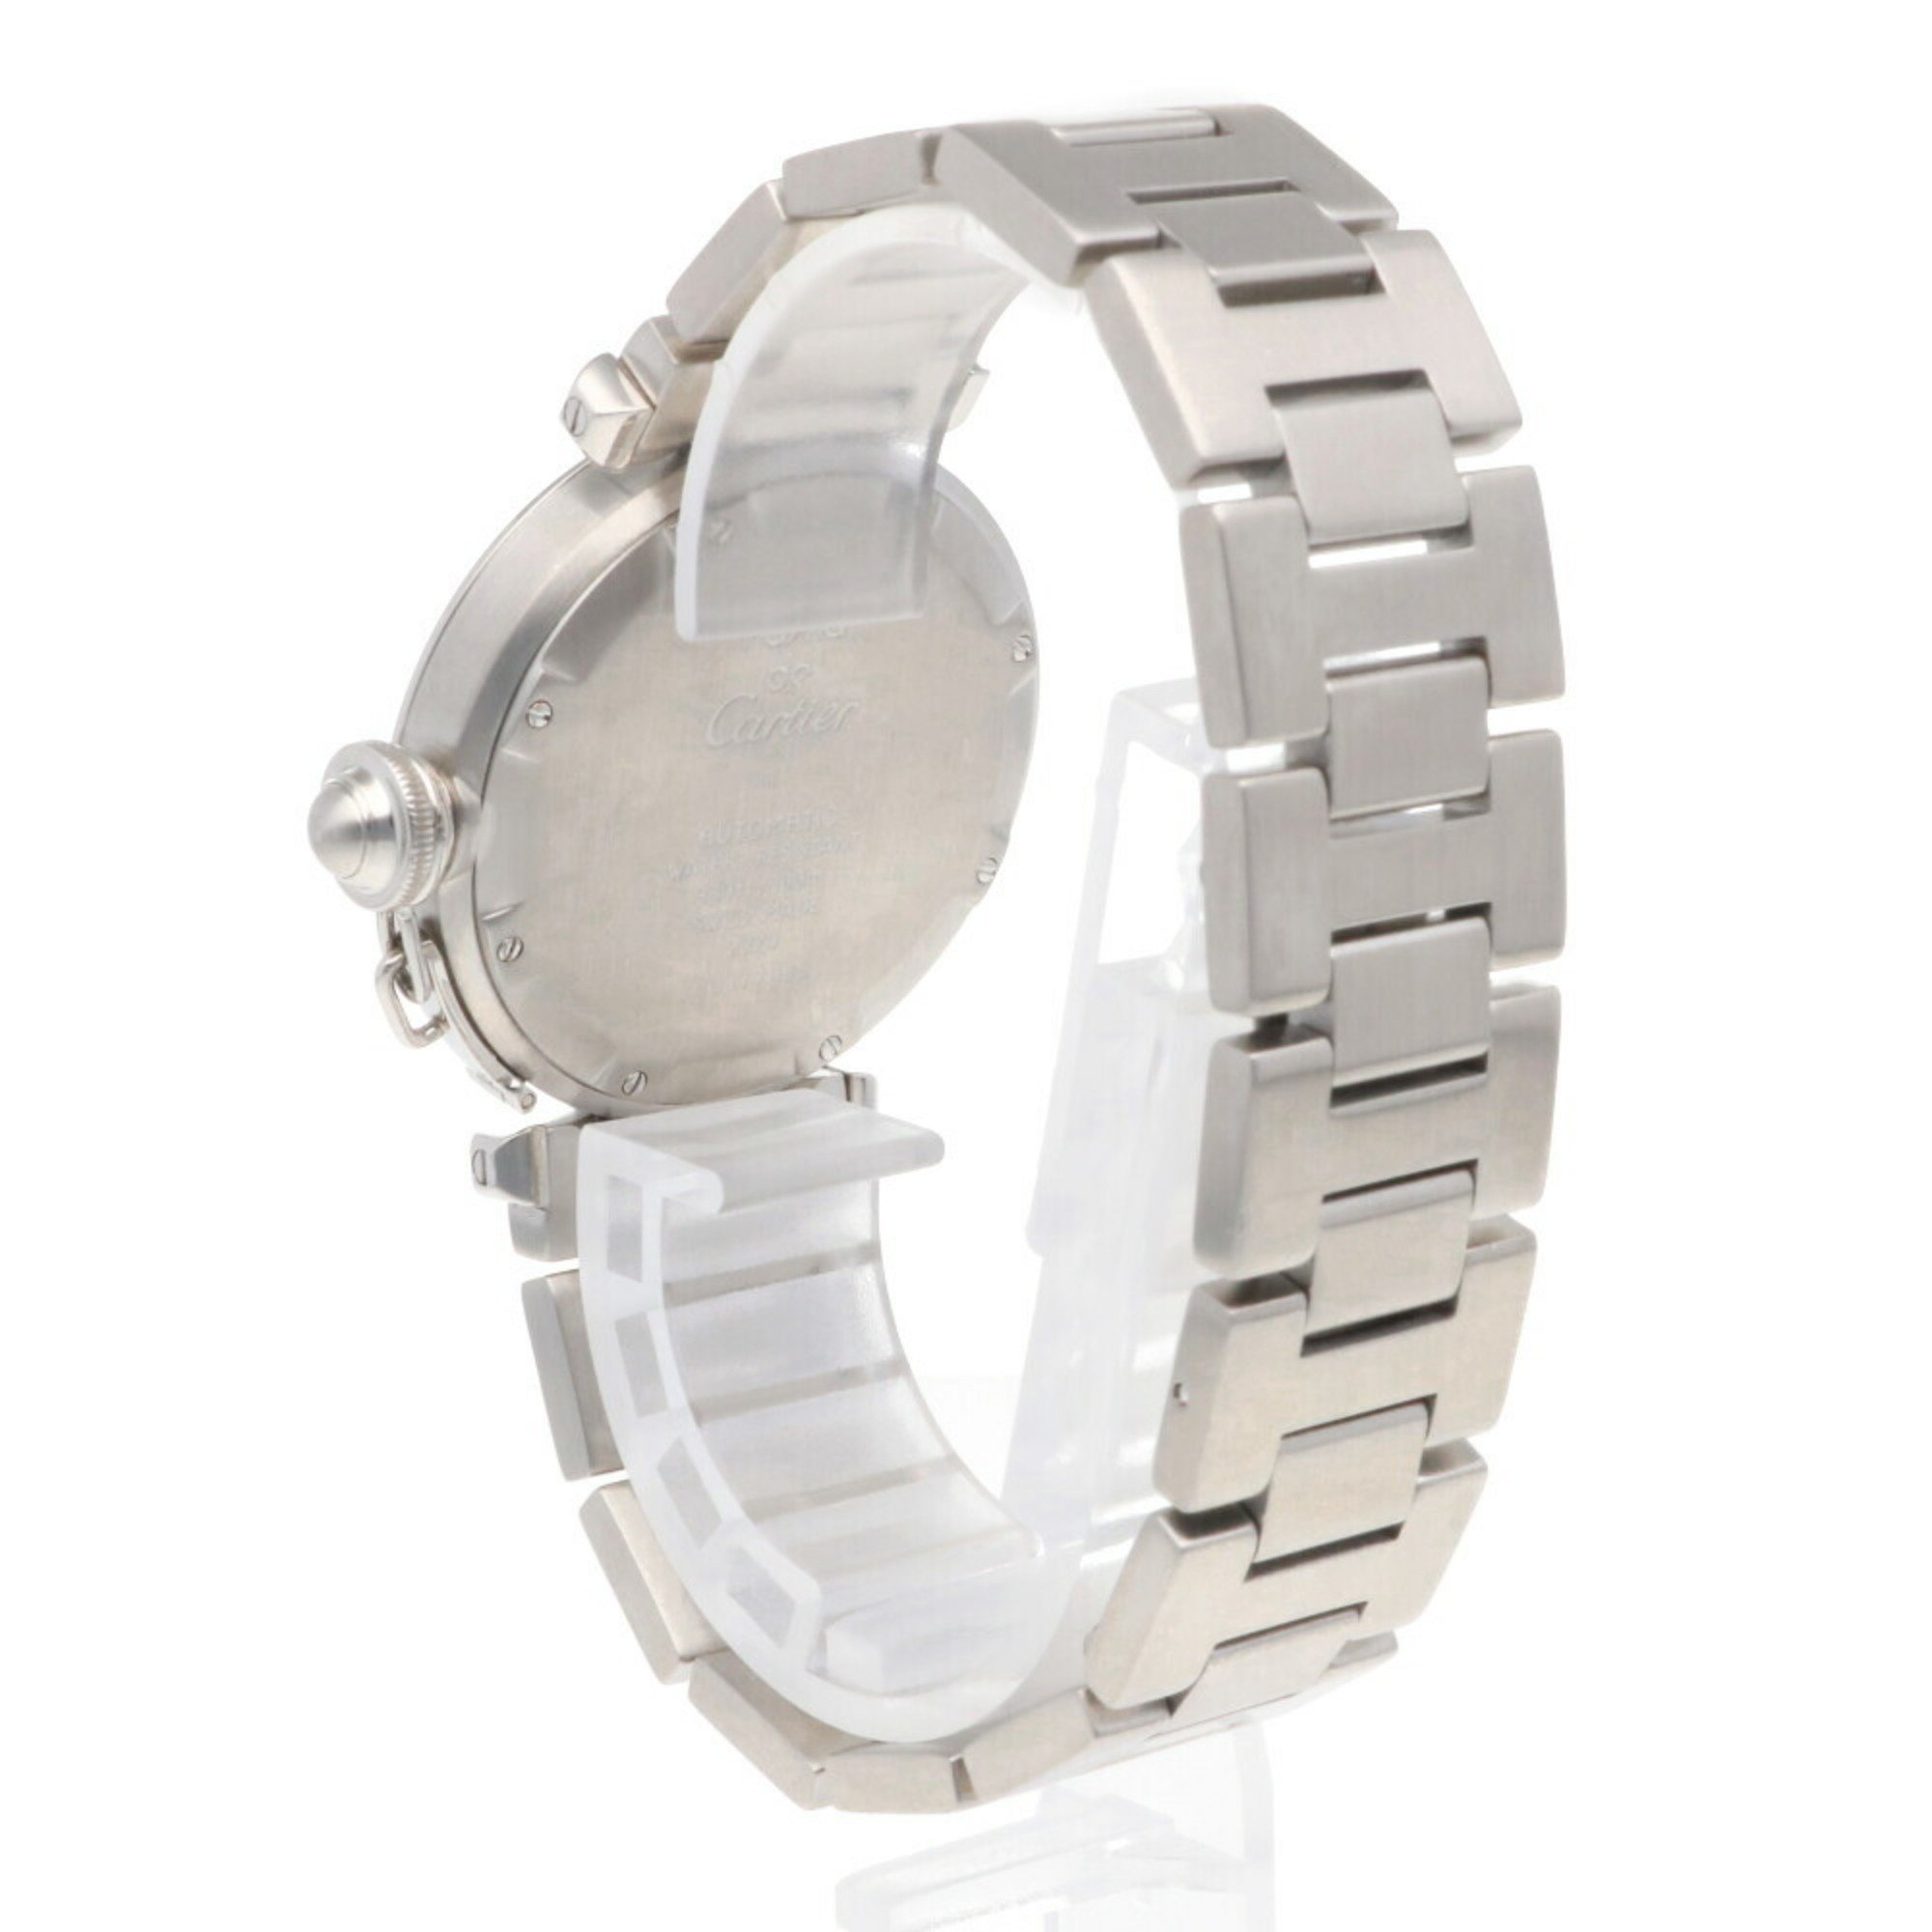 Cartier Pasha C Watch Stainless Steel 2324 Automatic Unisex CARTIER